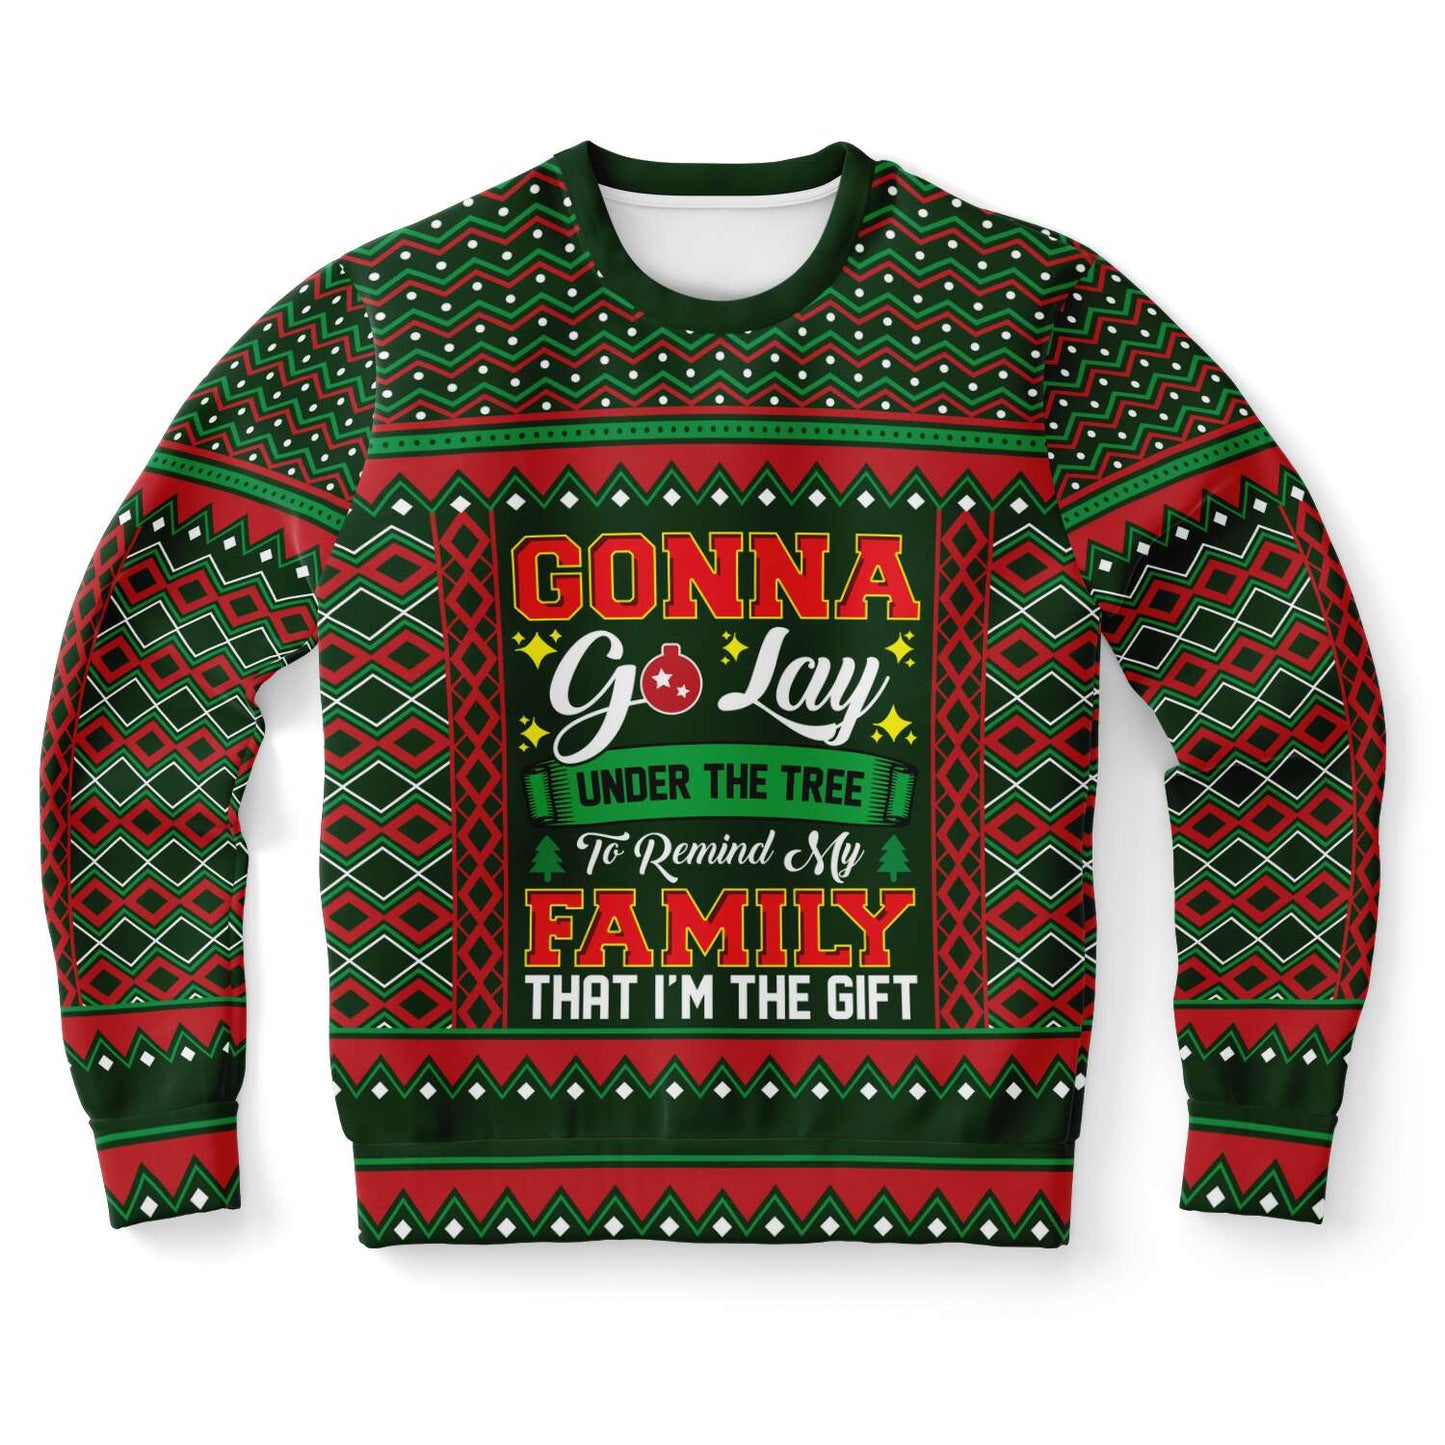 Gonna Lay Under the Tree to Remind My Family I'm the Gift - Funny Ugly Chrsitmas Sweater (Sweatshirt) XS